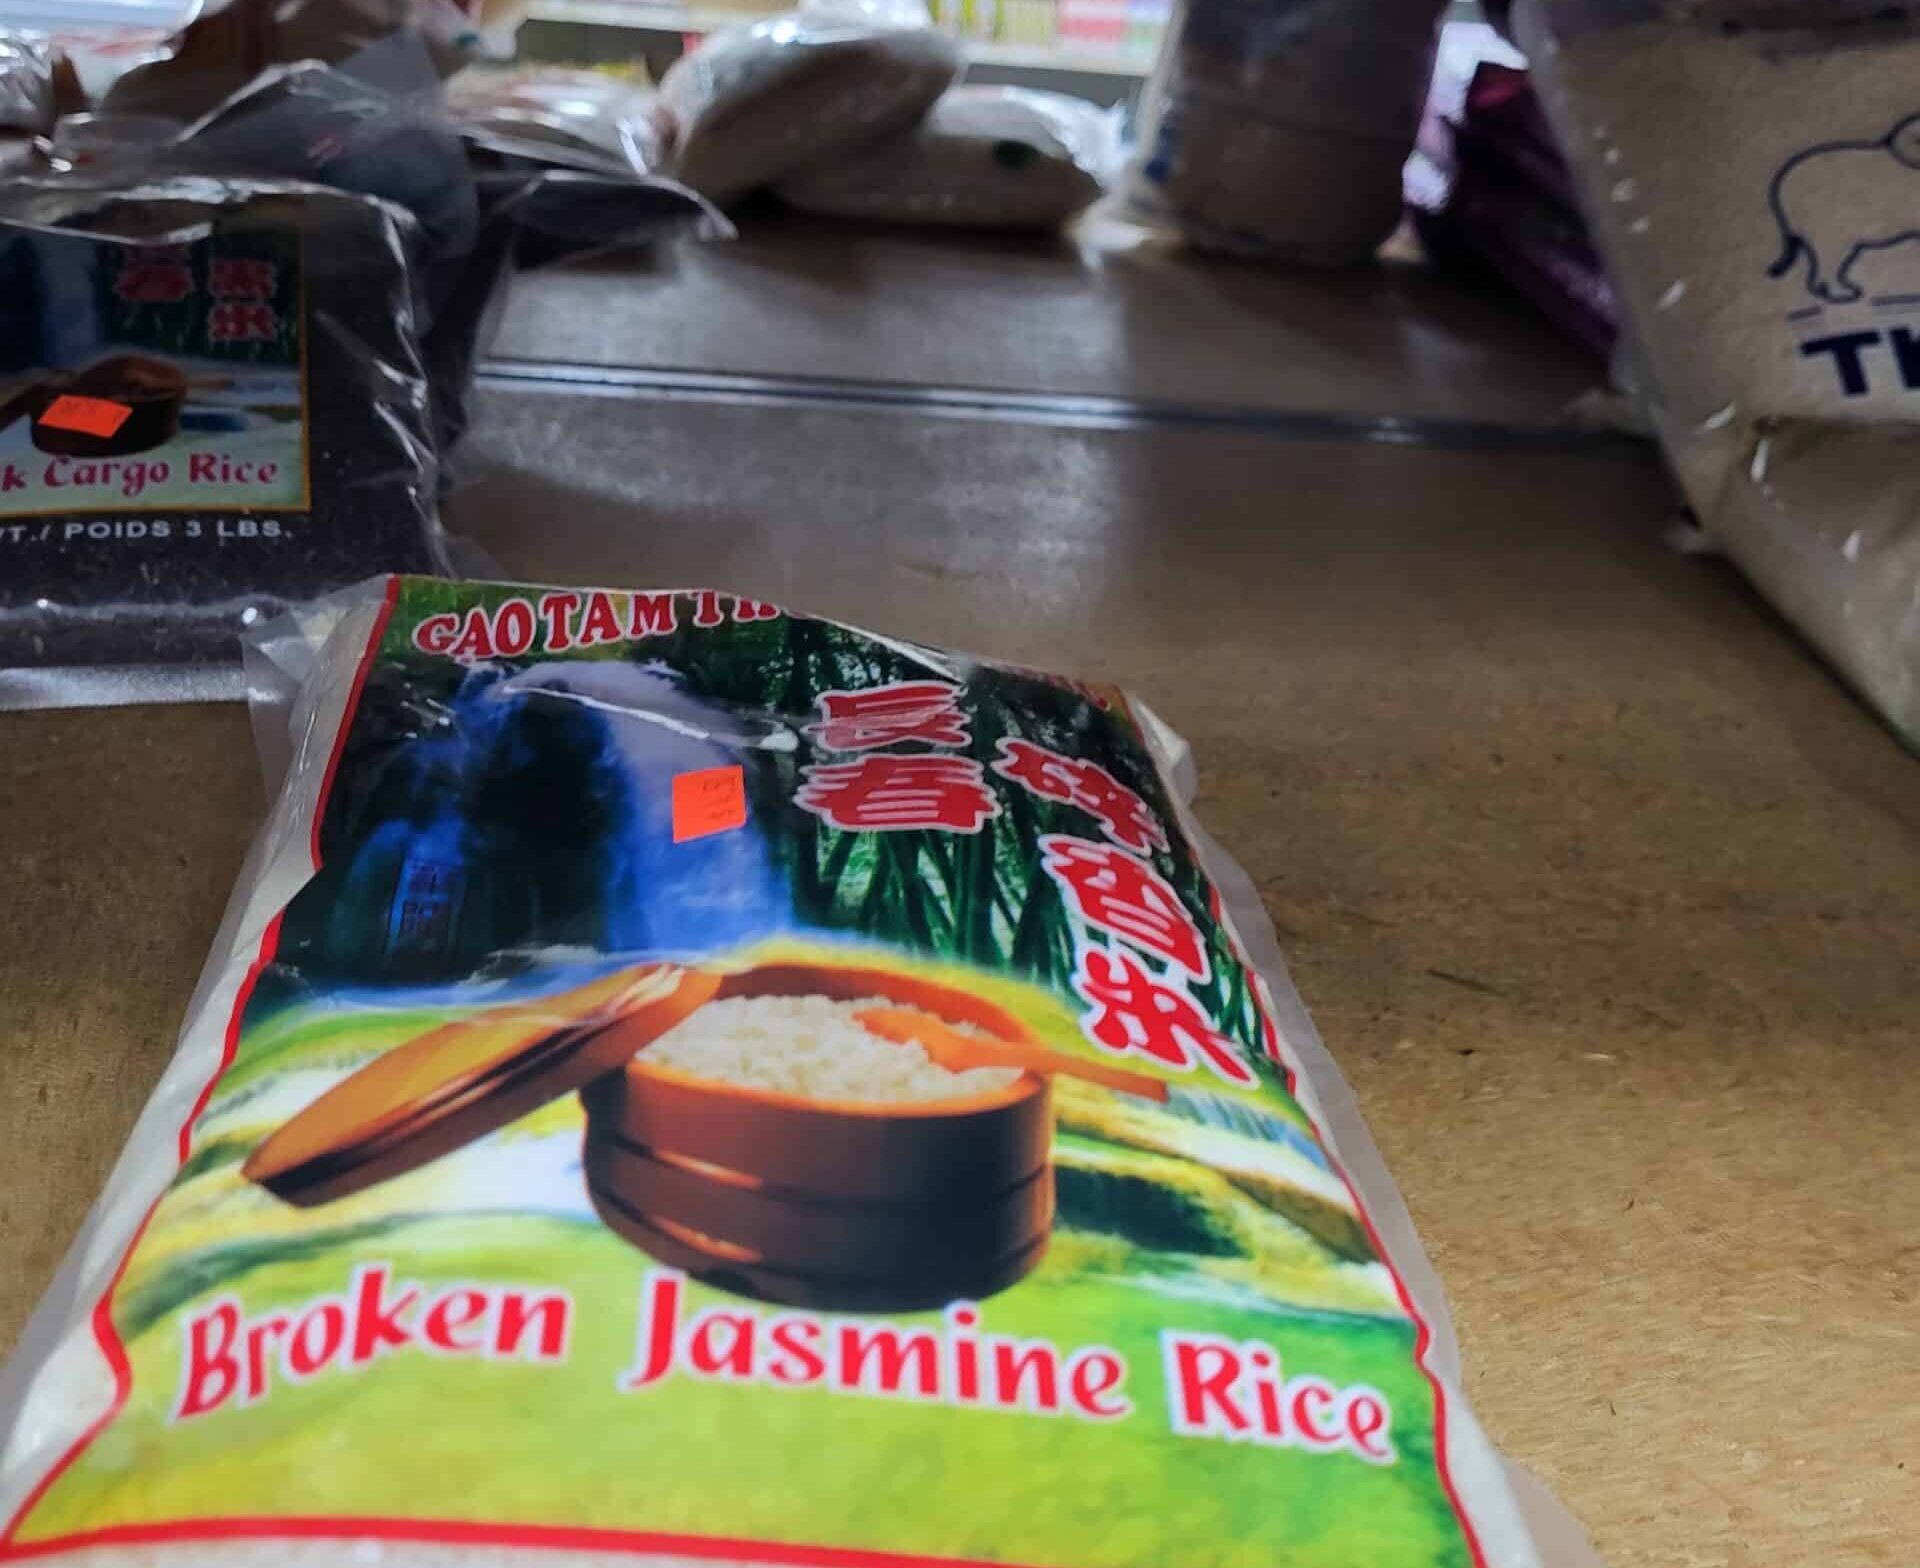 A bag of rice at an Asian grocery.